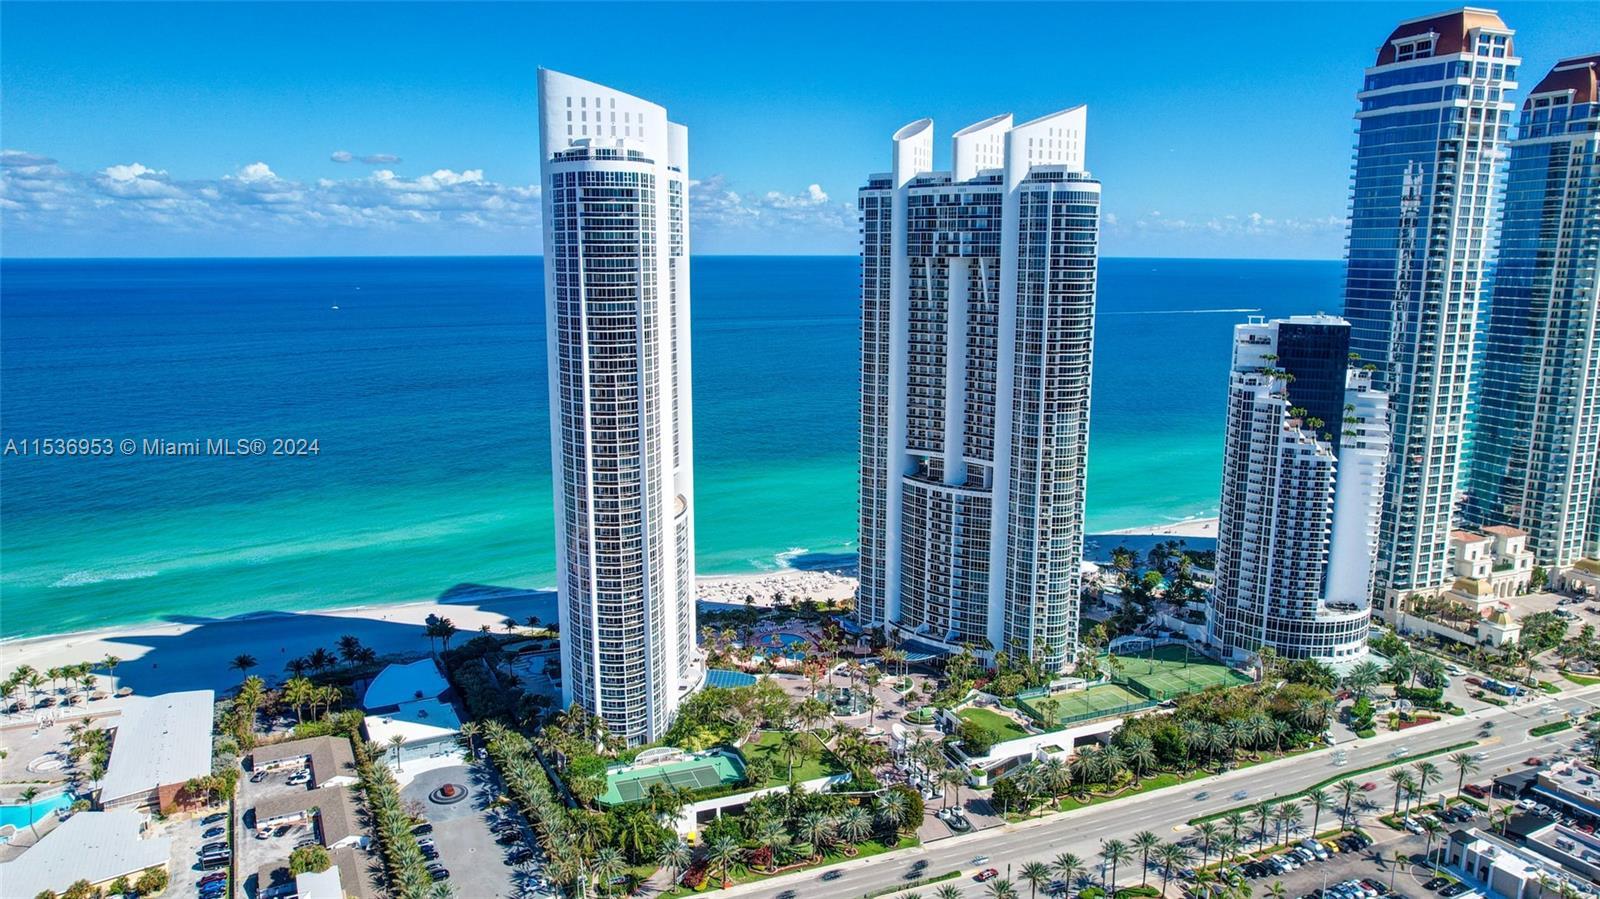 Indulge in luxurious oceanfront living at Trump Royale. This lavish 2-bed, 2.5-bath residence offers